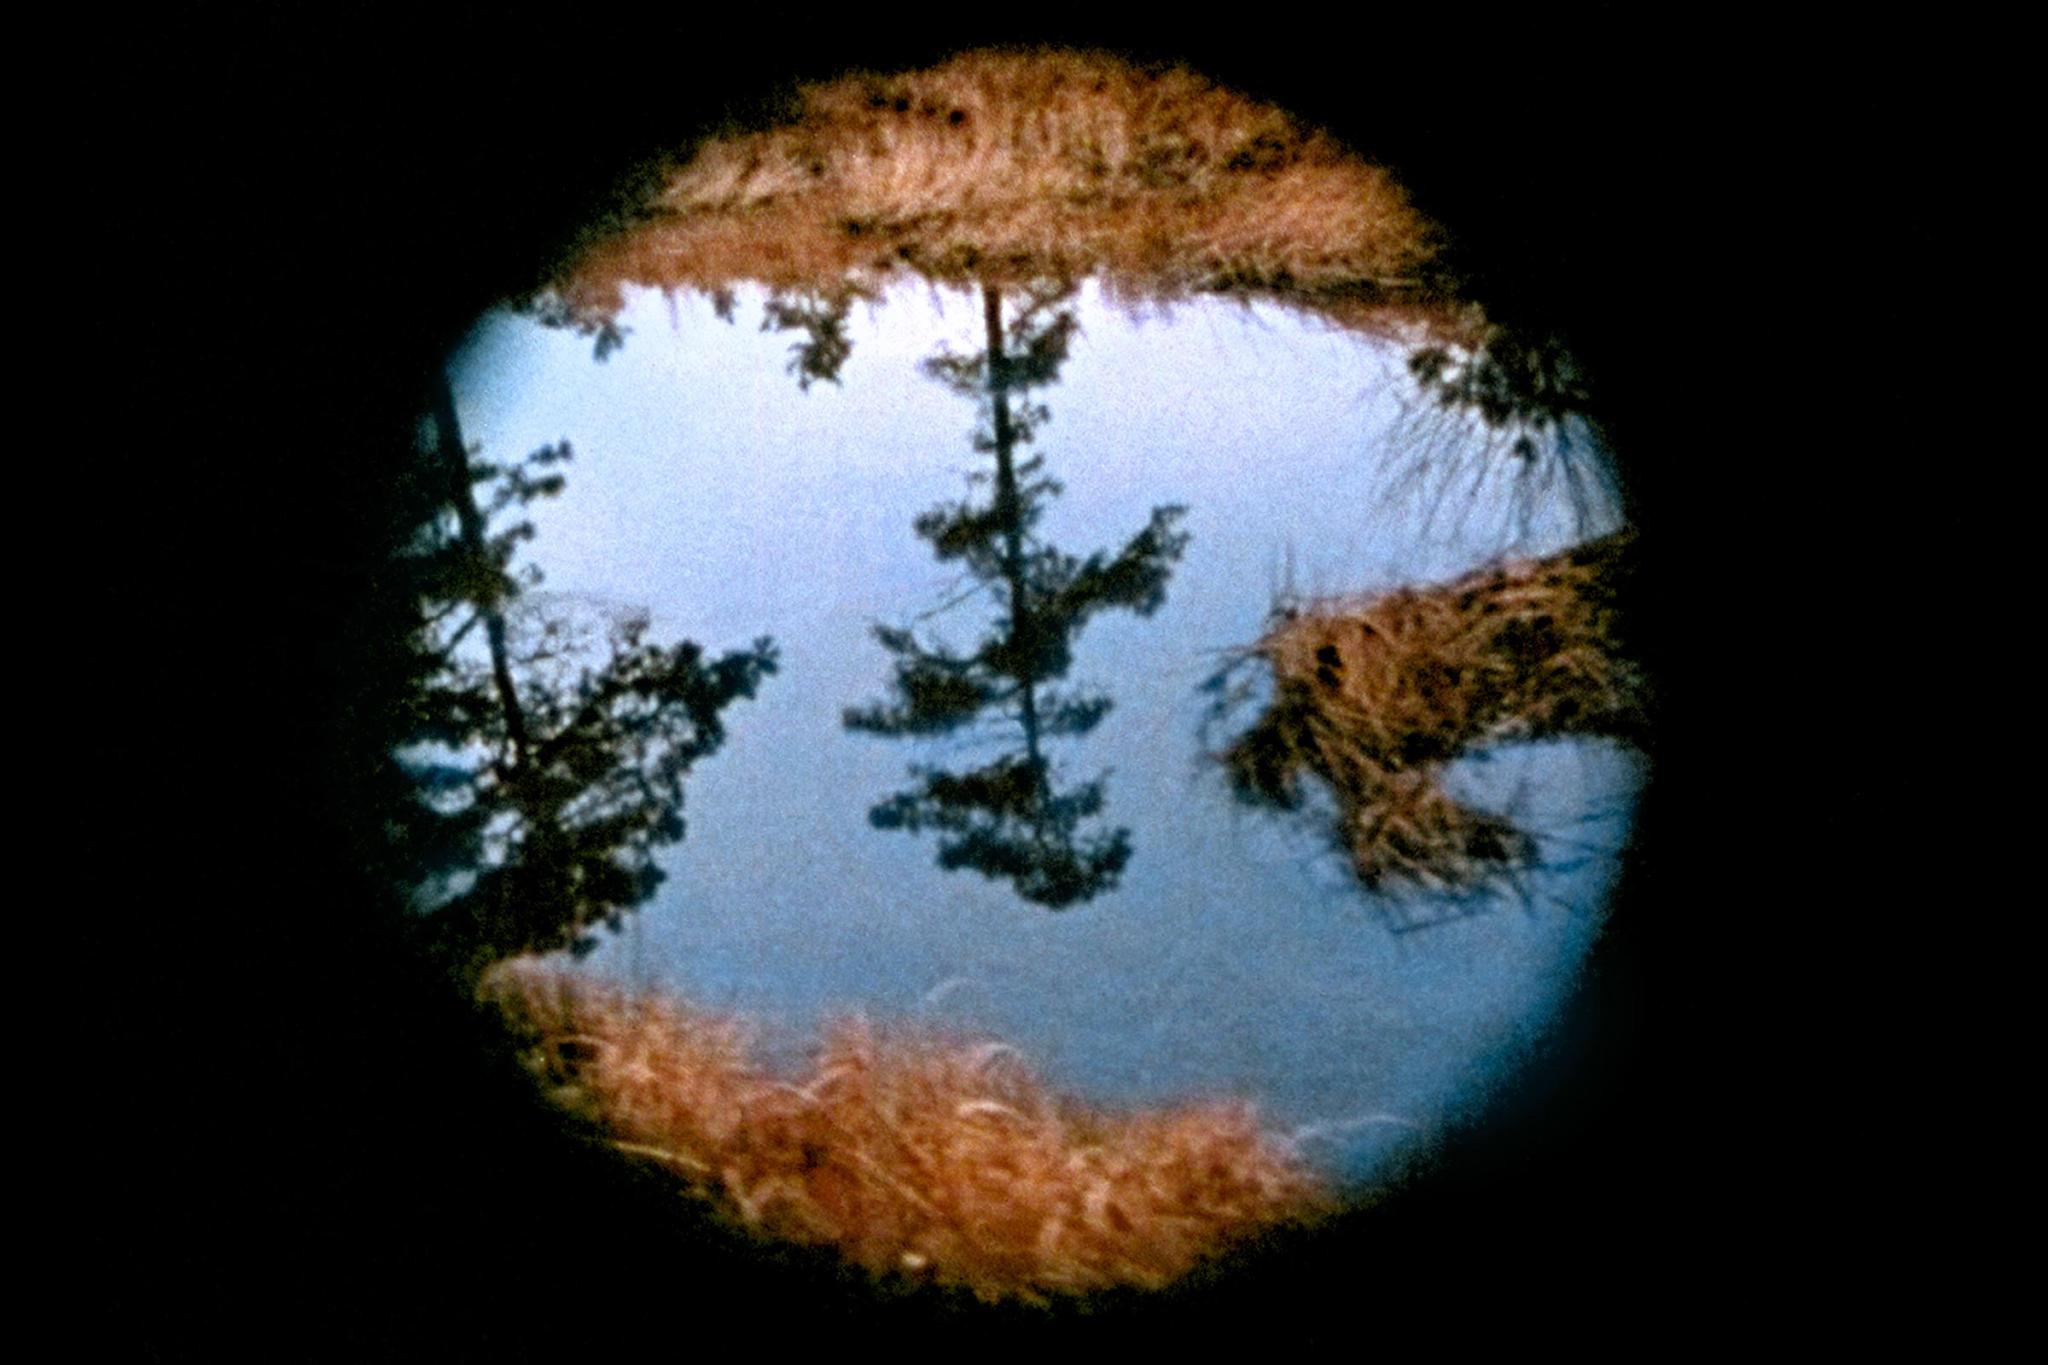 From Nancy Holt's film Pine Barrens. A view through a circular cut out showing a tree reflected upside down in water.